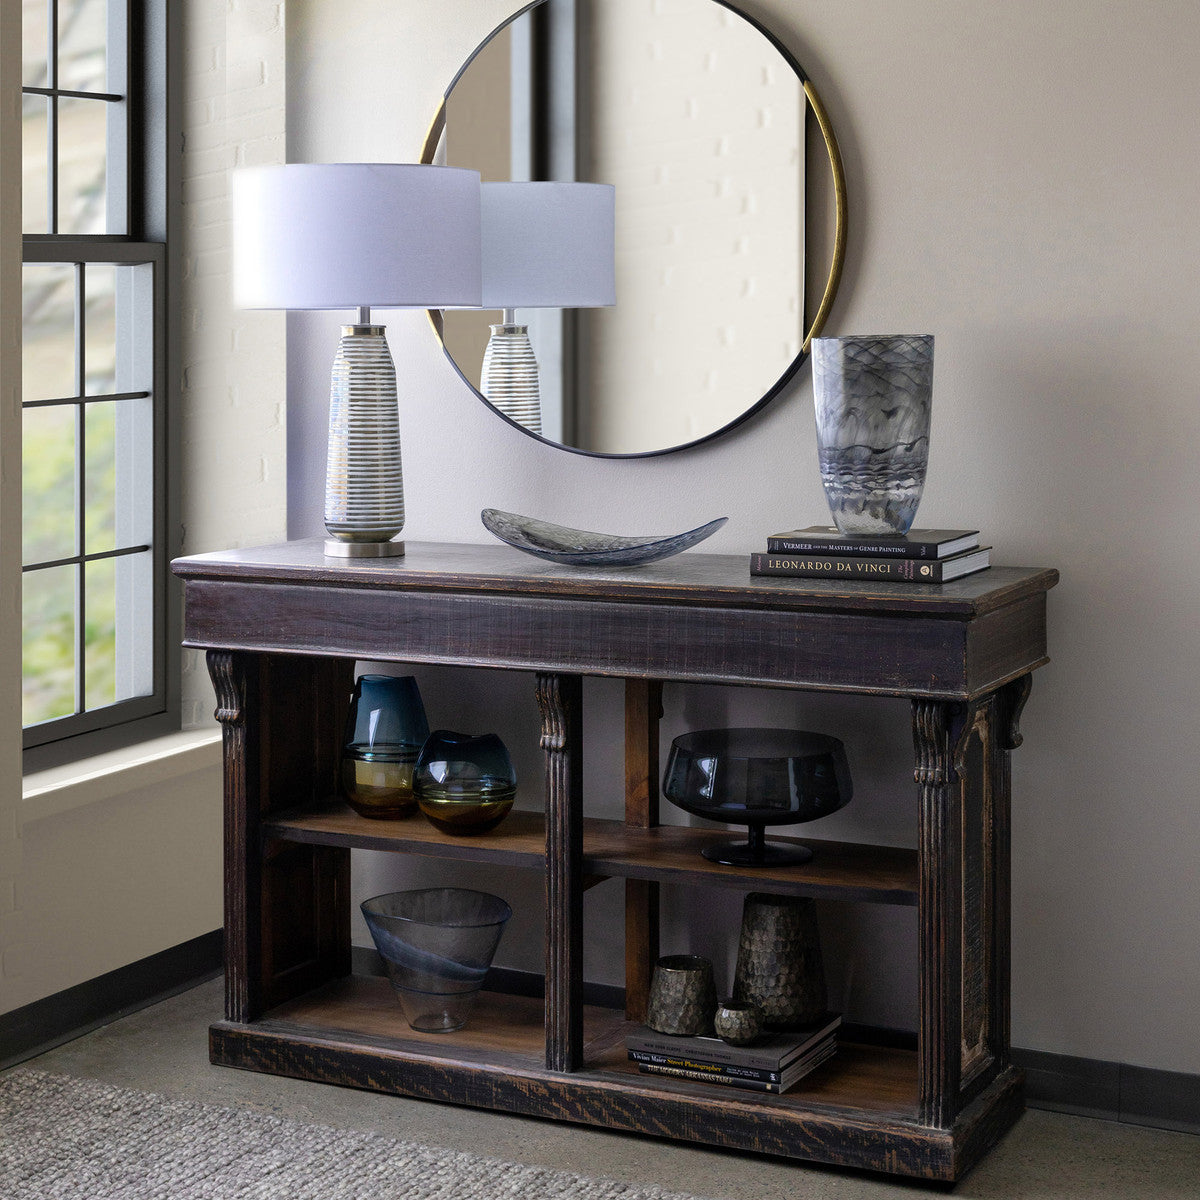 urban style ribbed table lampon a wood console with mirror